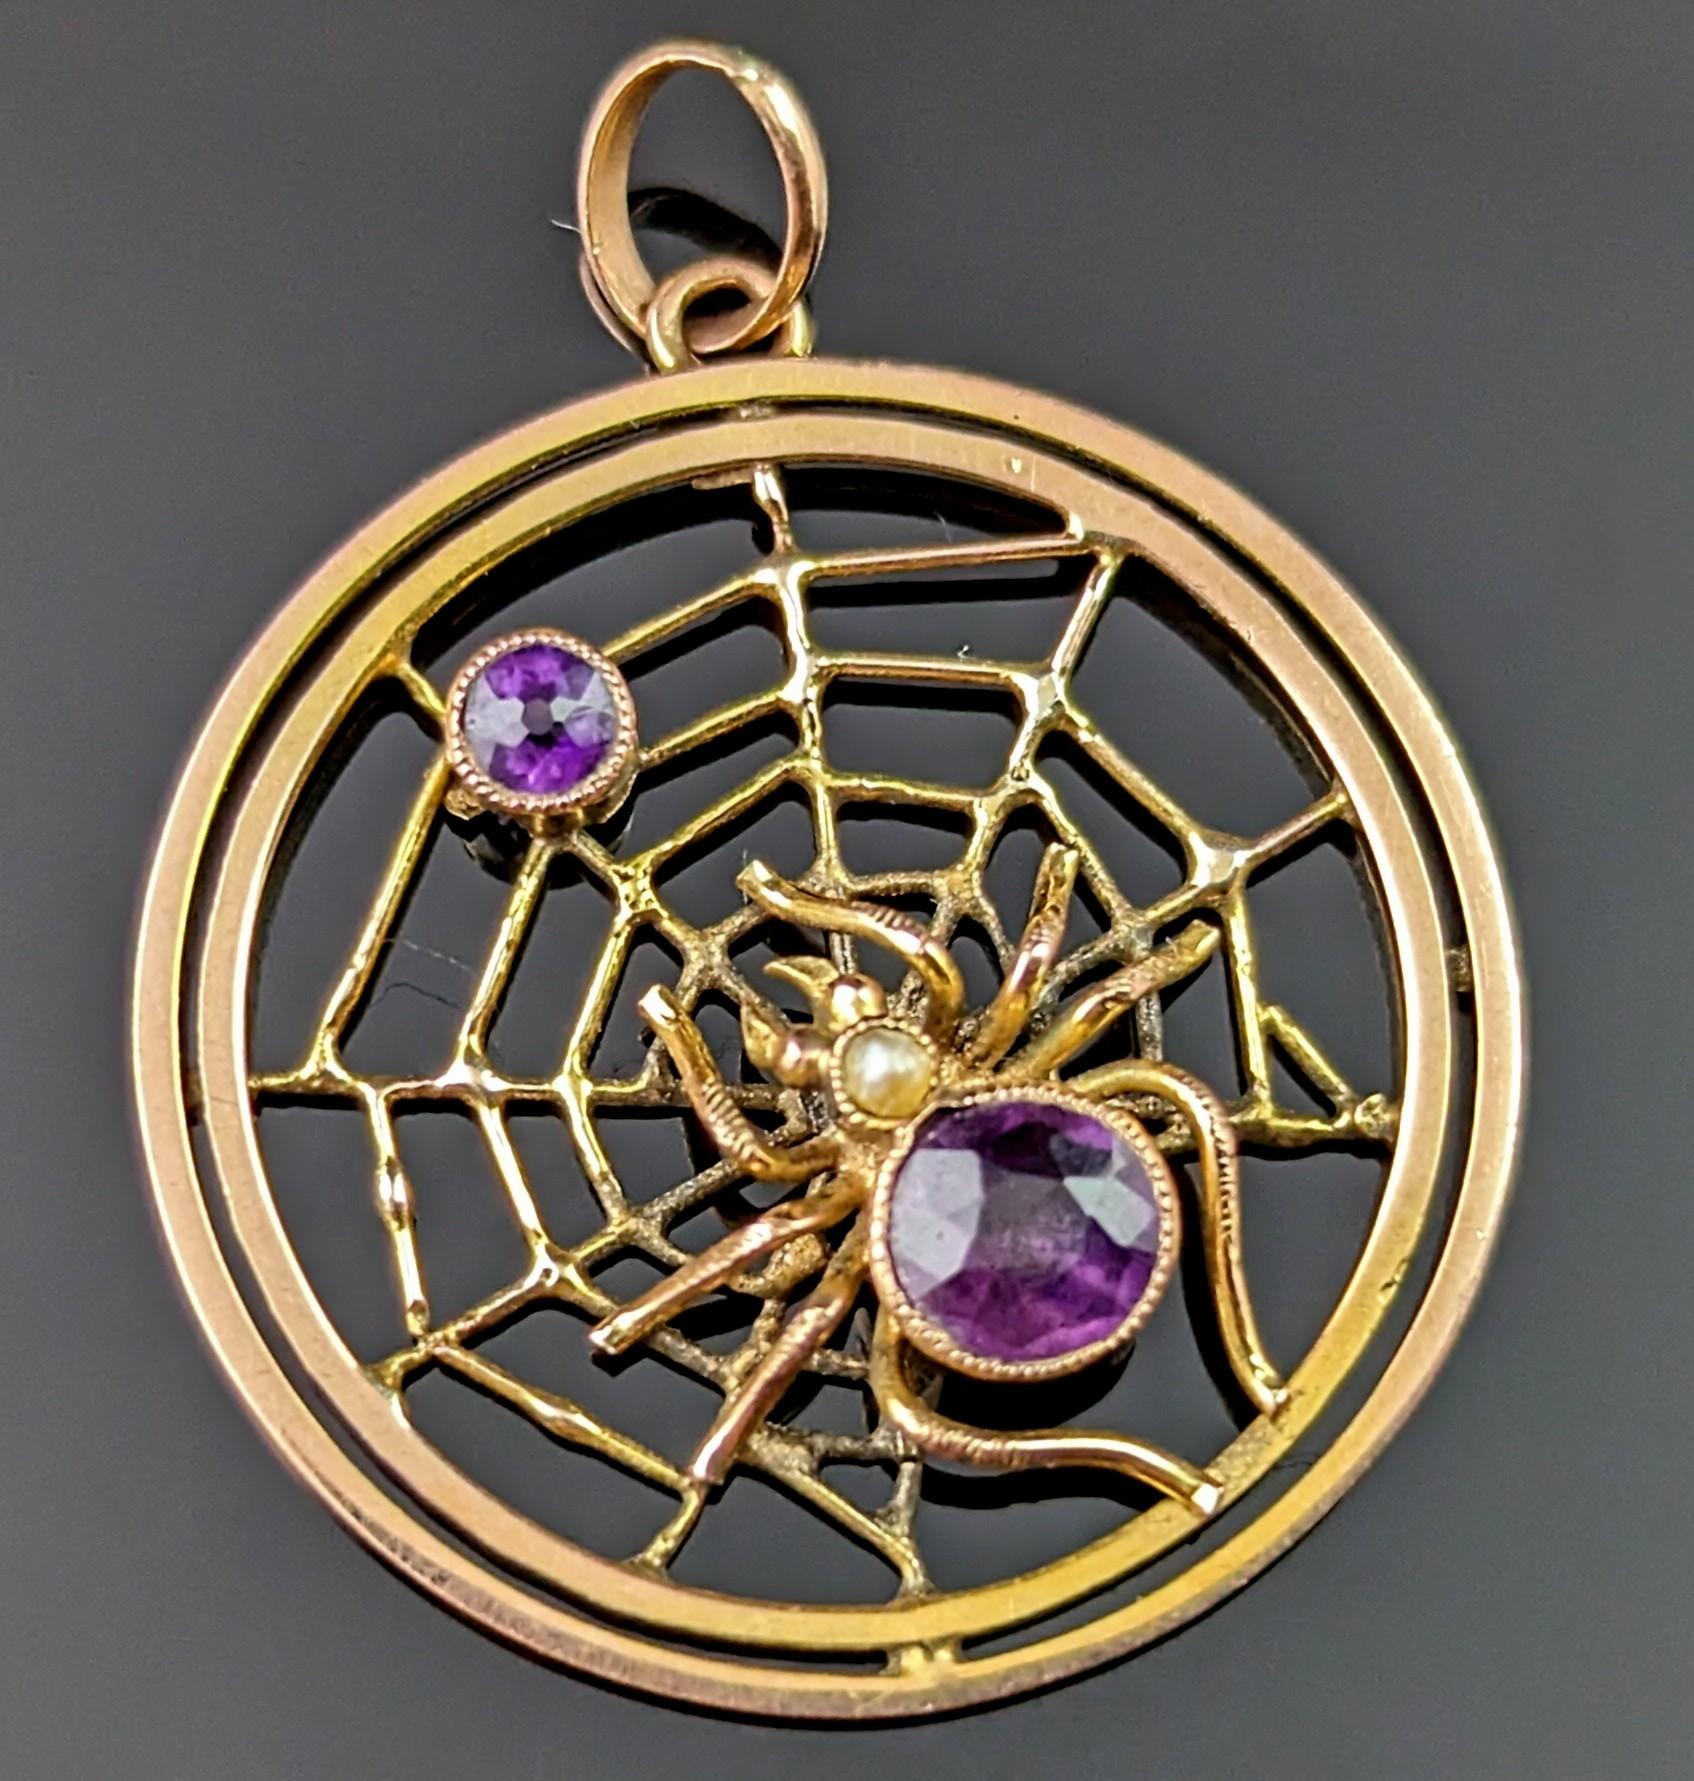 Women's or Men's Antique Spider and Web pendant, Amethyst and Pearl, 9kt gold, Edwardian 